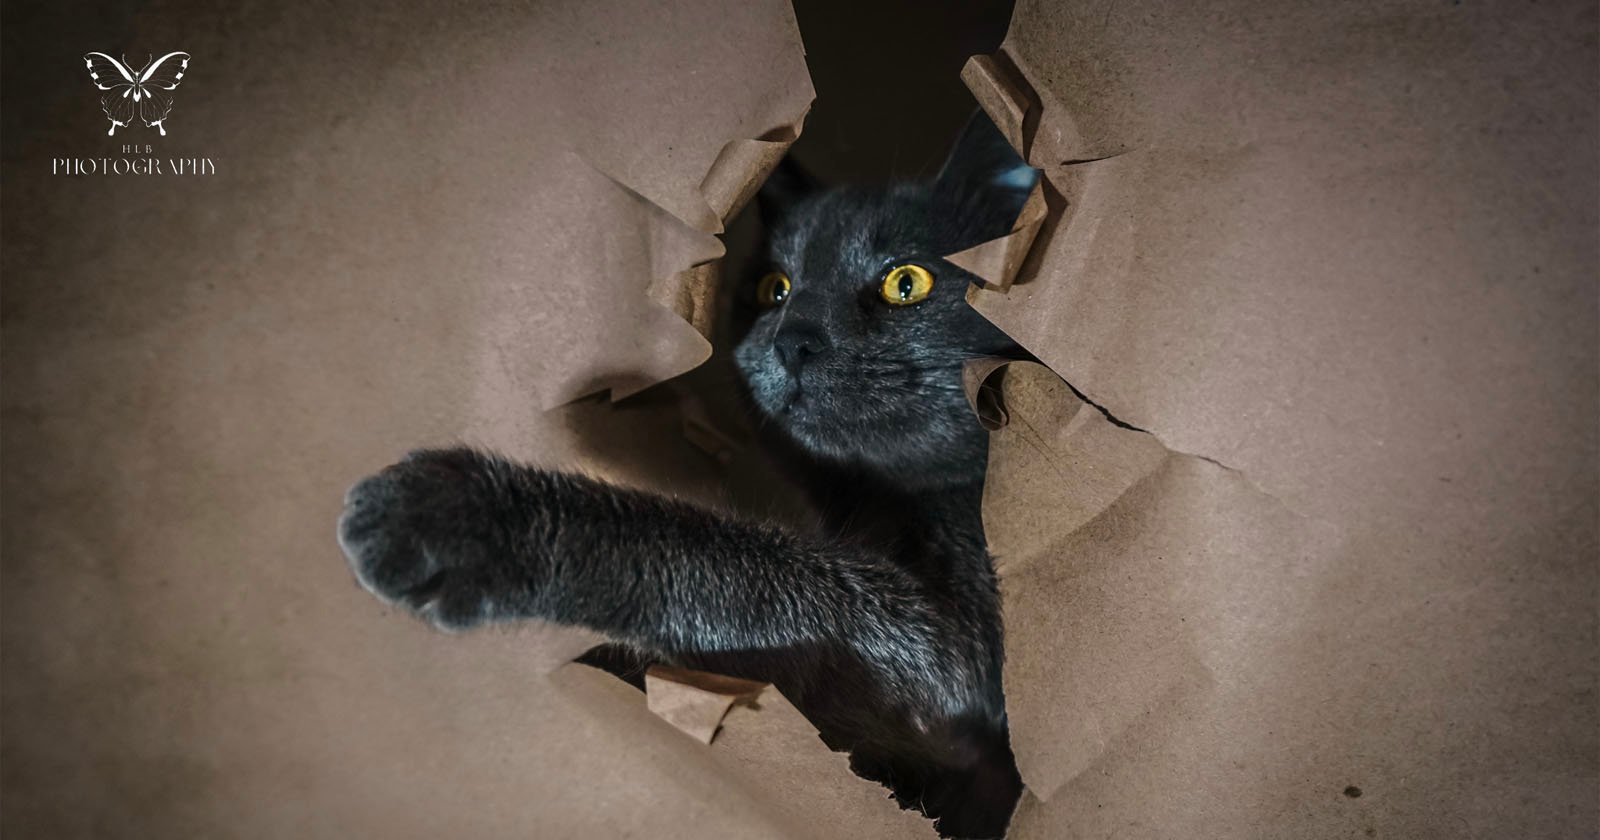 A gray cat with striking yellow eyes peeking through a jagged hole in brown paper, one paw outstretched as if reaching or playing.